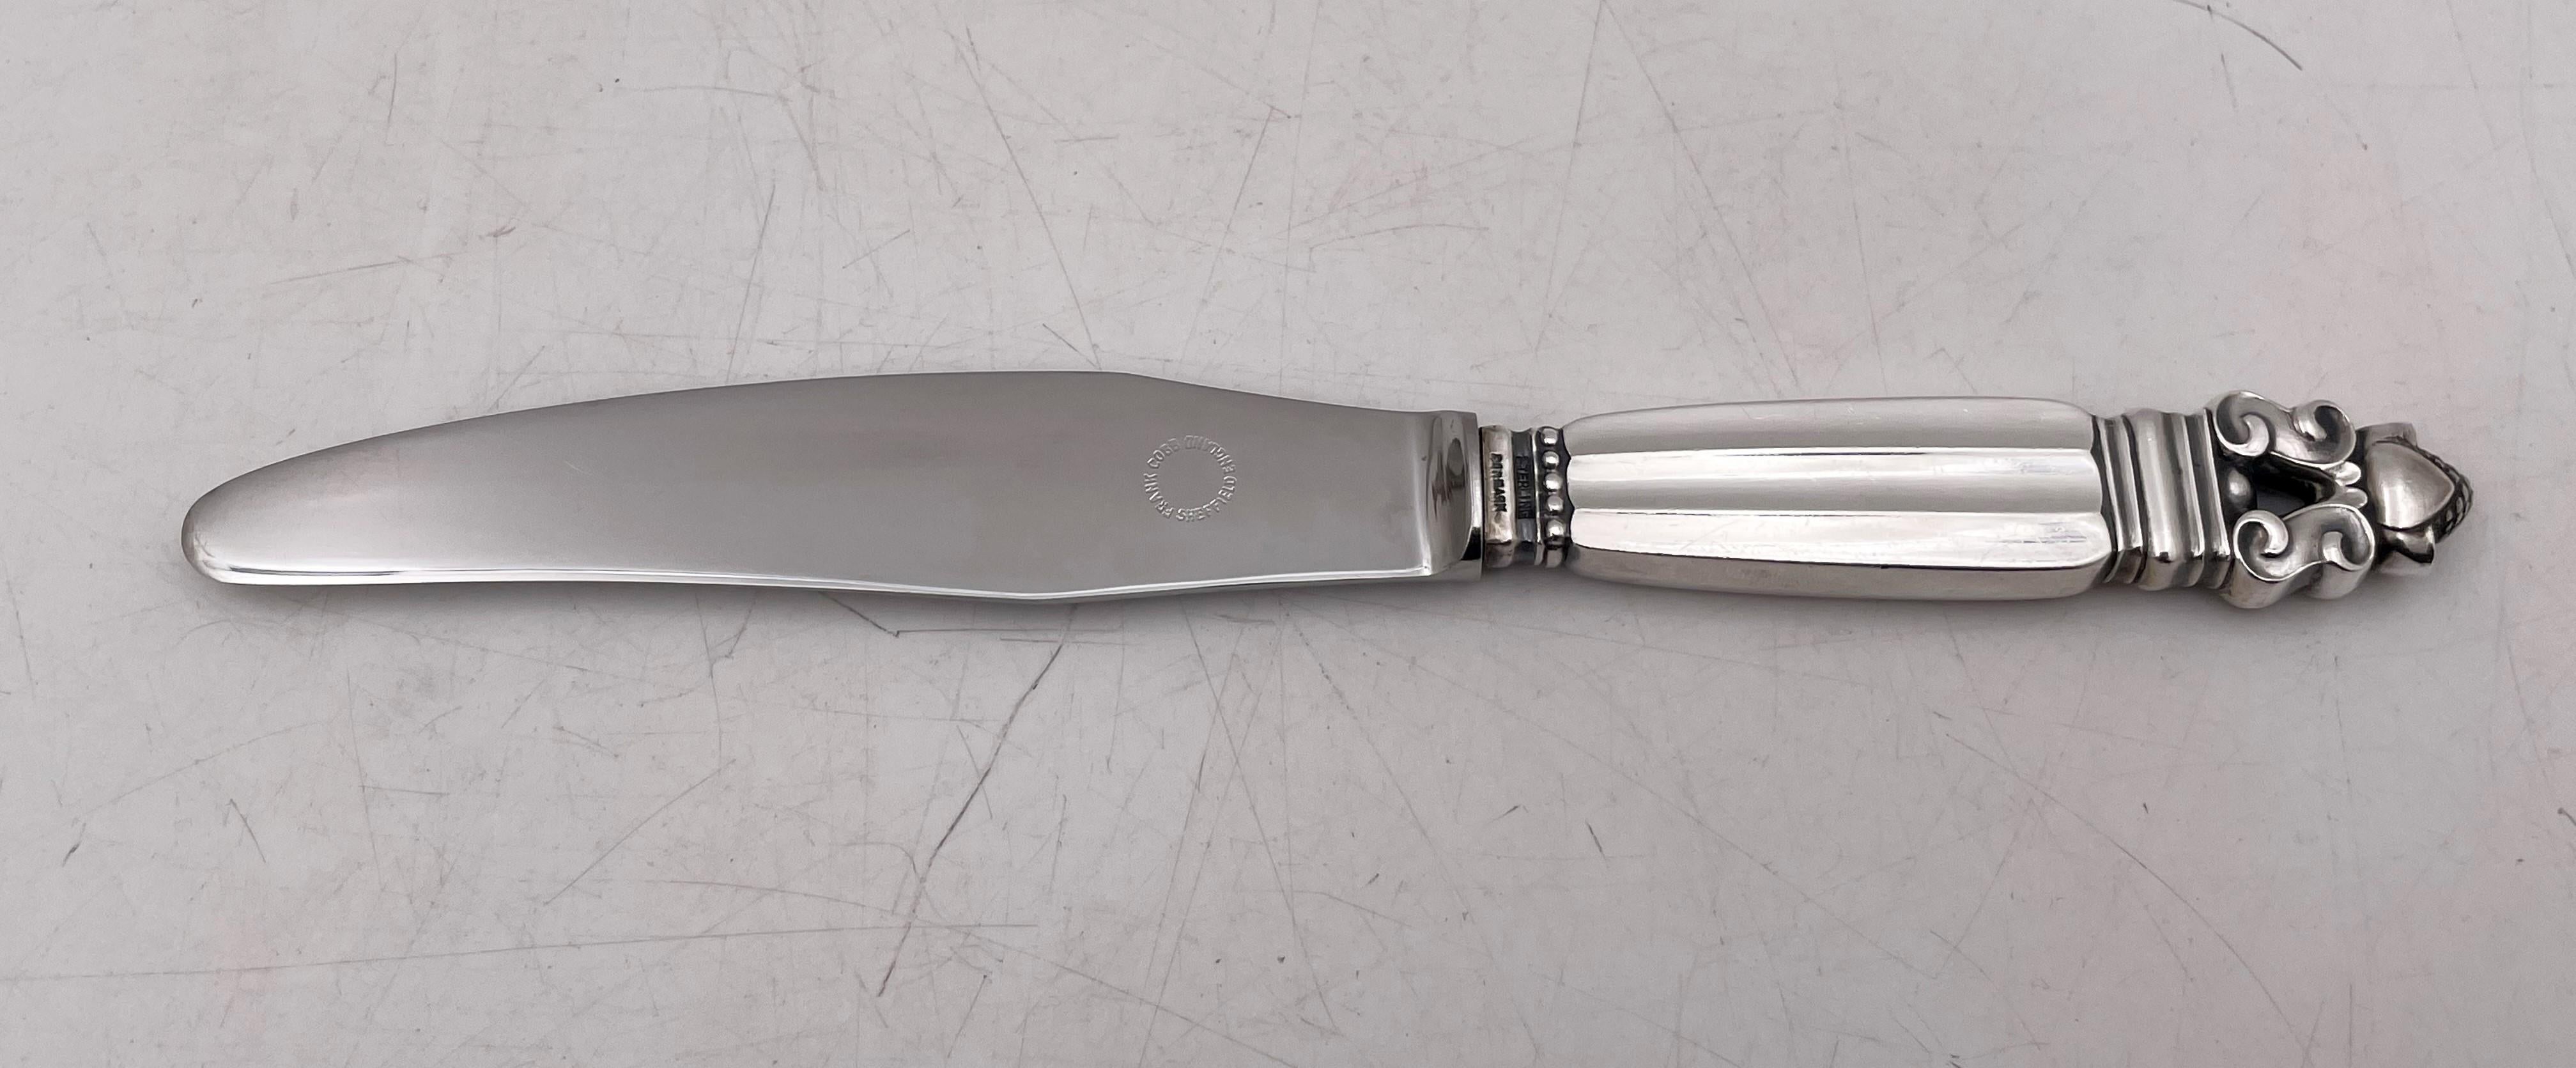 Georg Jensen, sterling silver place setting in the celebrated Acorn pattern, designed by Johan Rohde, consisting of:

- a Texan dinner knife measuring 9 7/8'' in length

- a dinner knife measuring 9 1/8'' in length

- a luncheon knife measuring 8